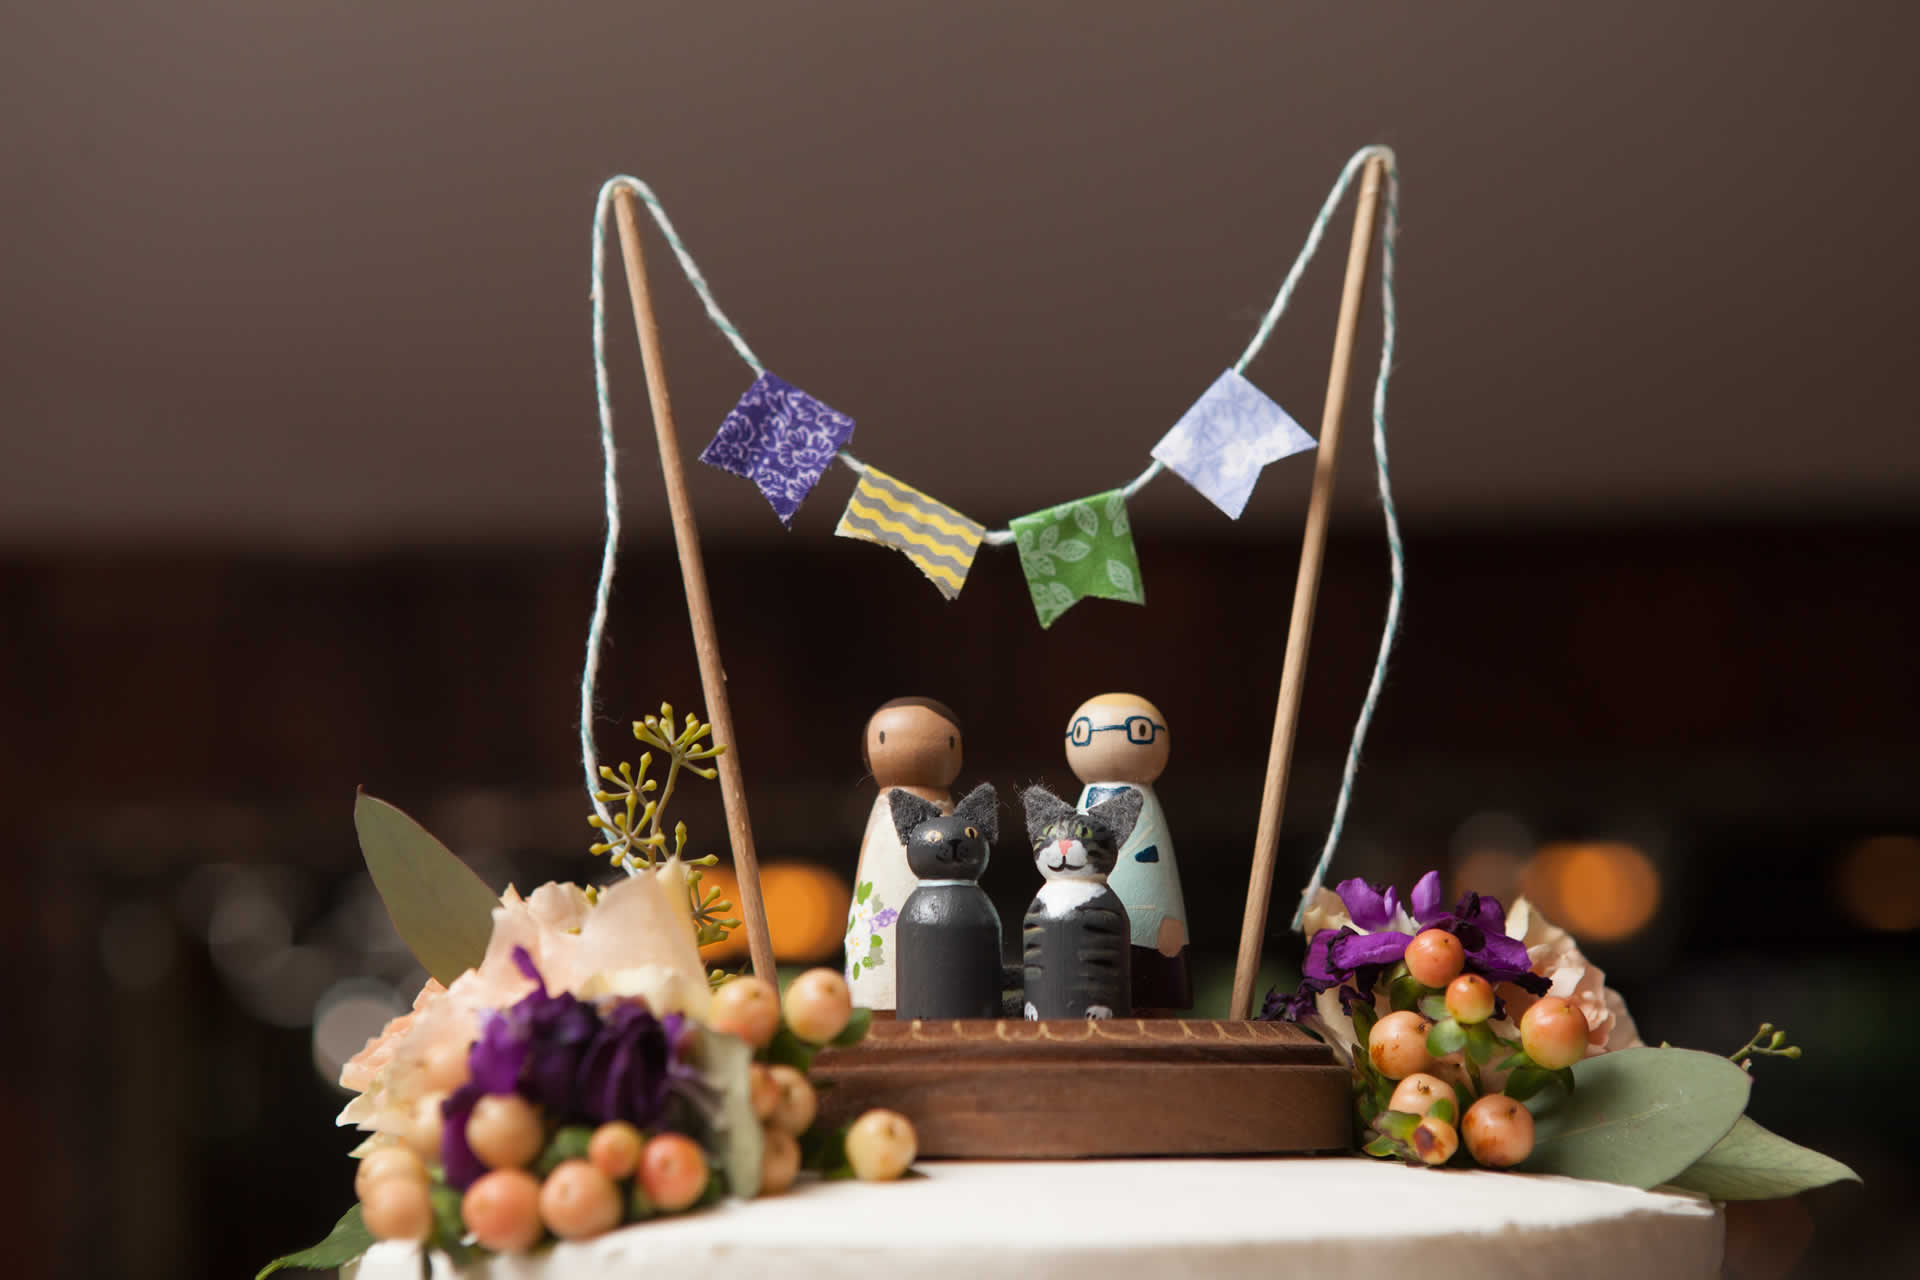 Decoration on top of the wedding cake